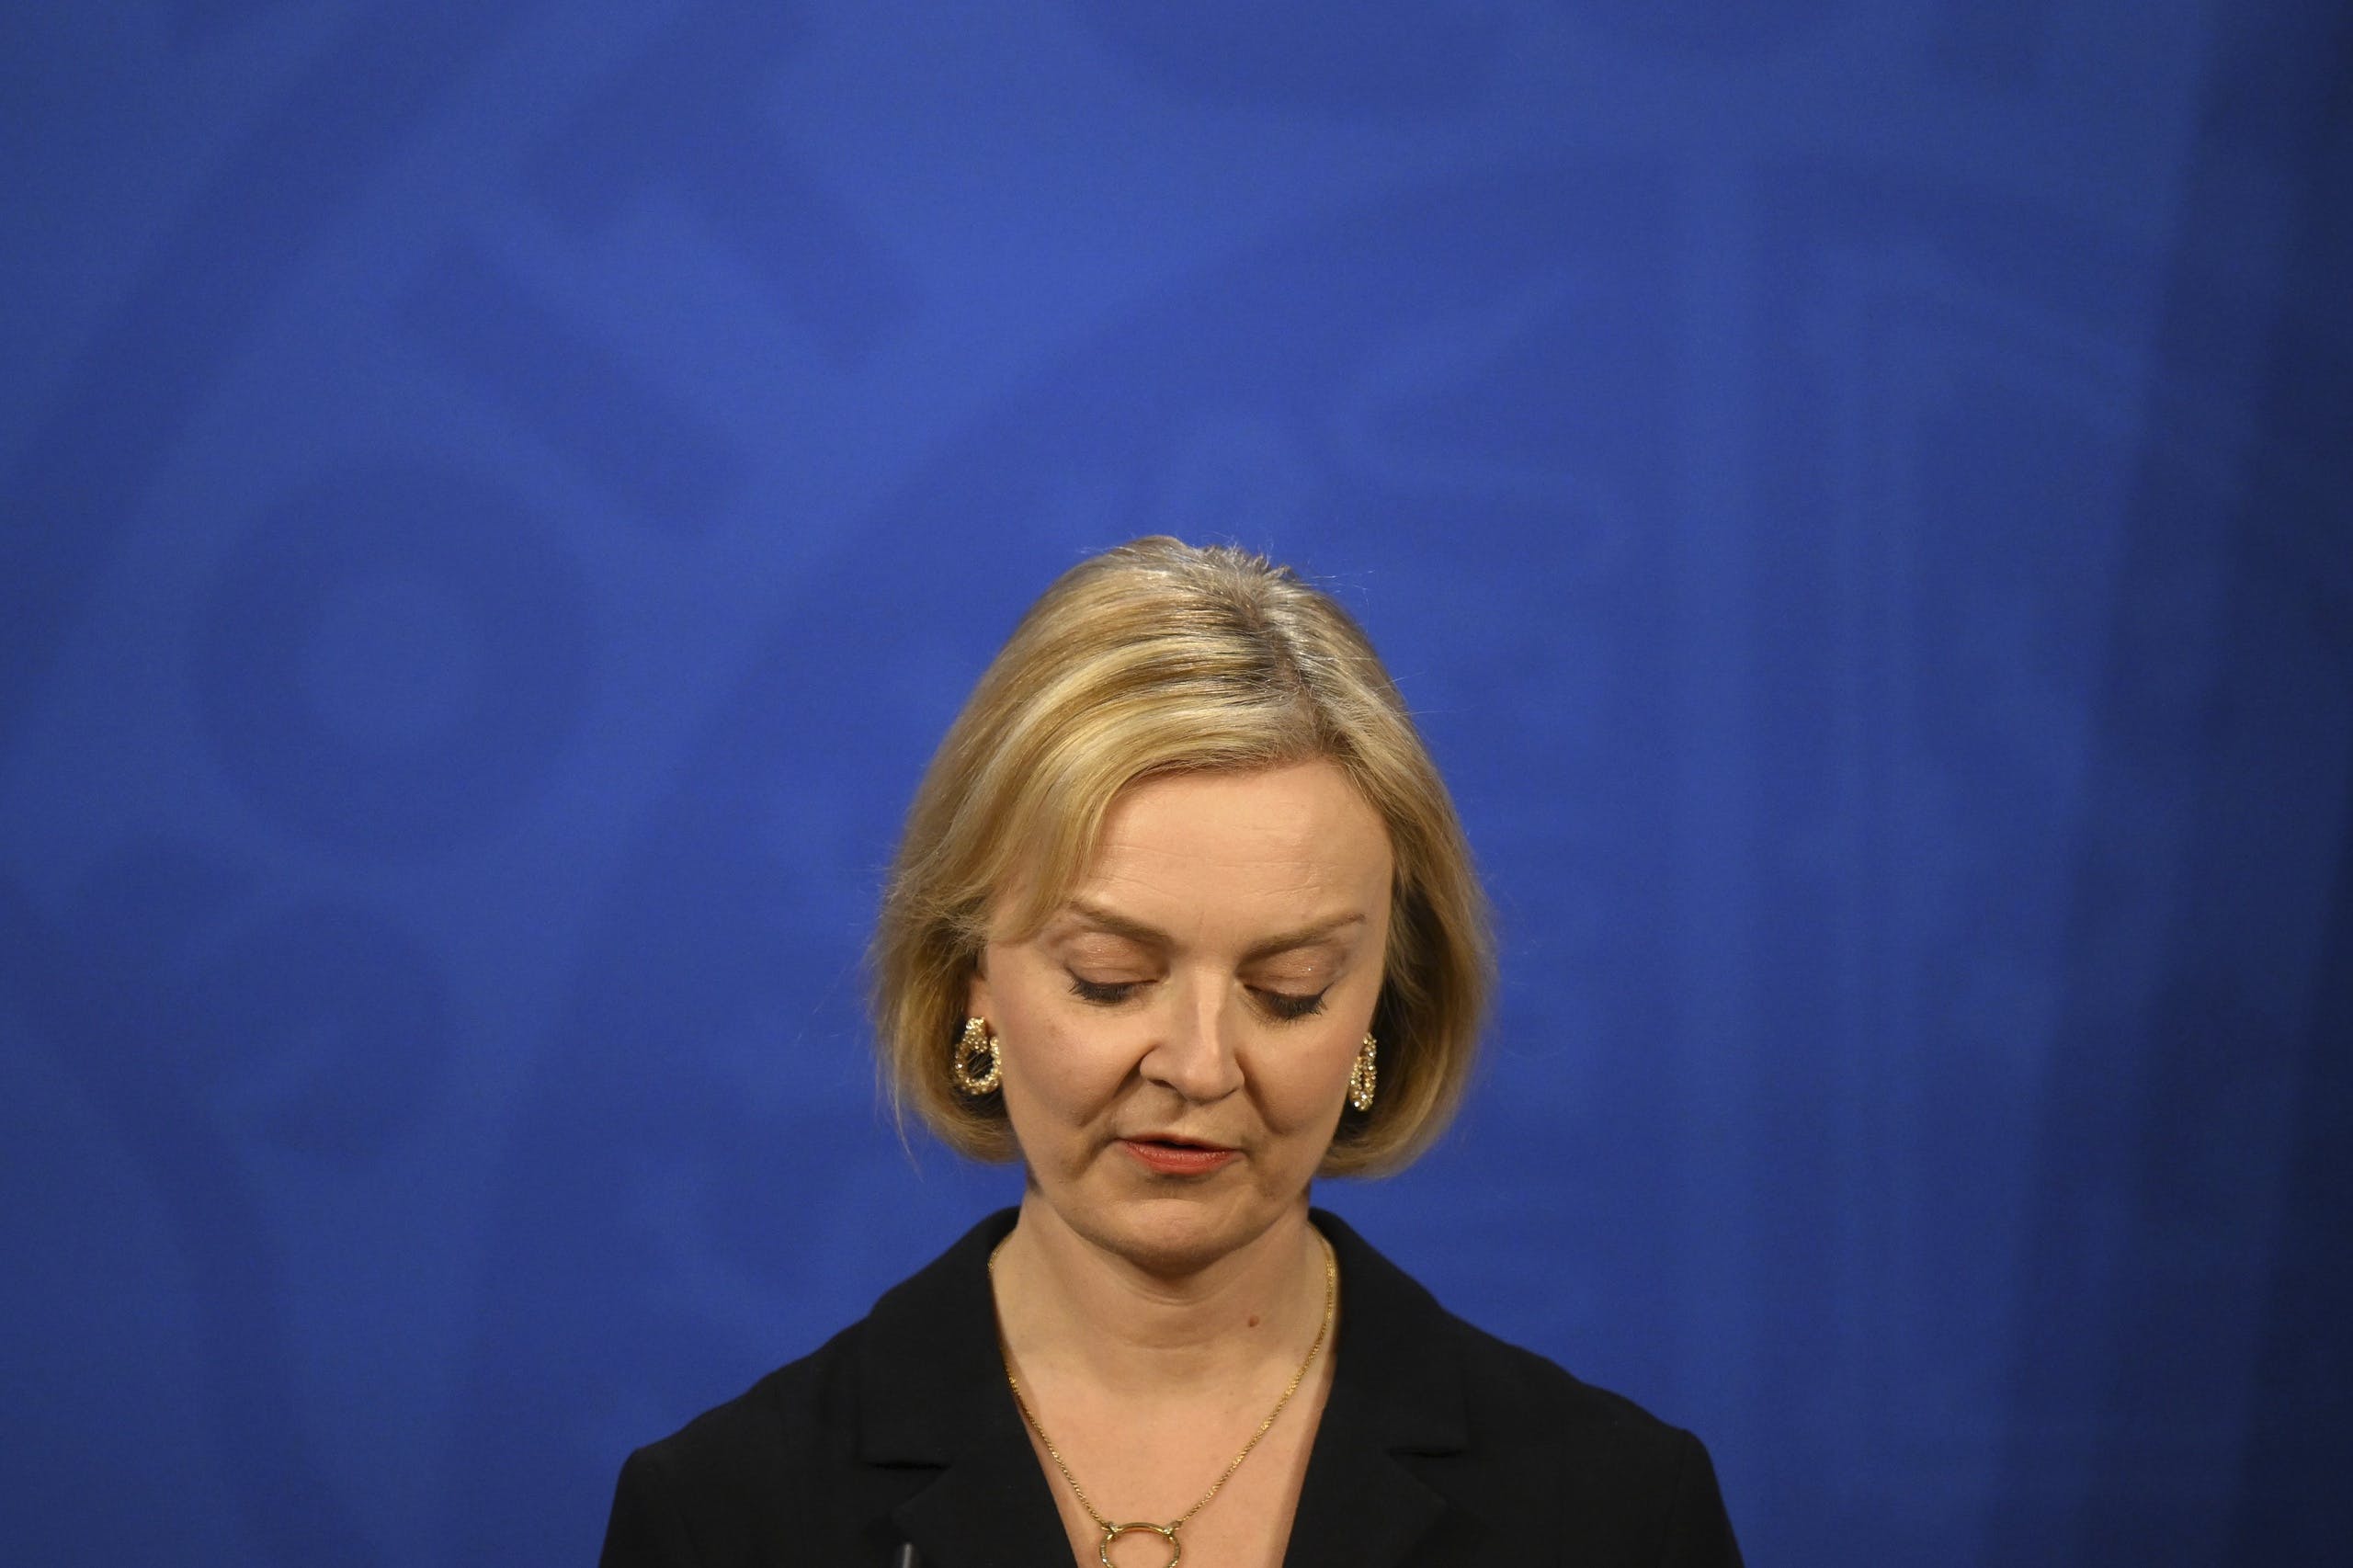 Liz Truss could be Prime Minister last week